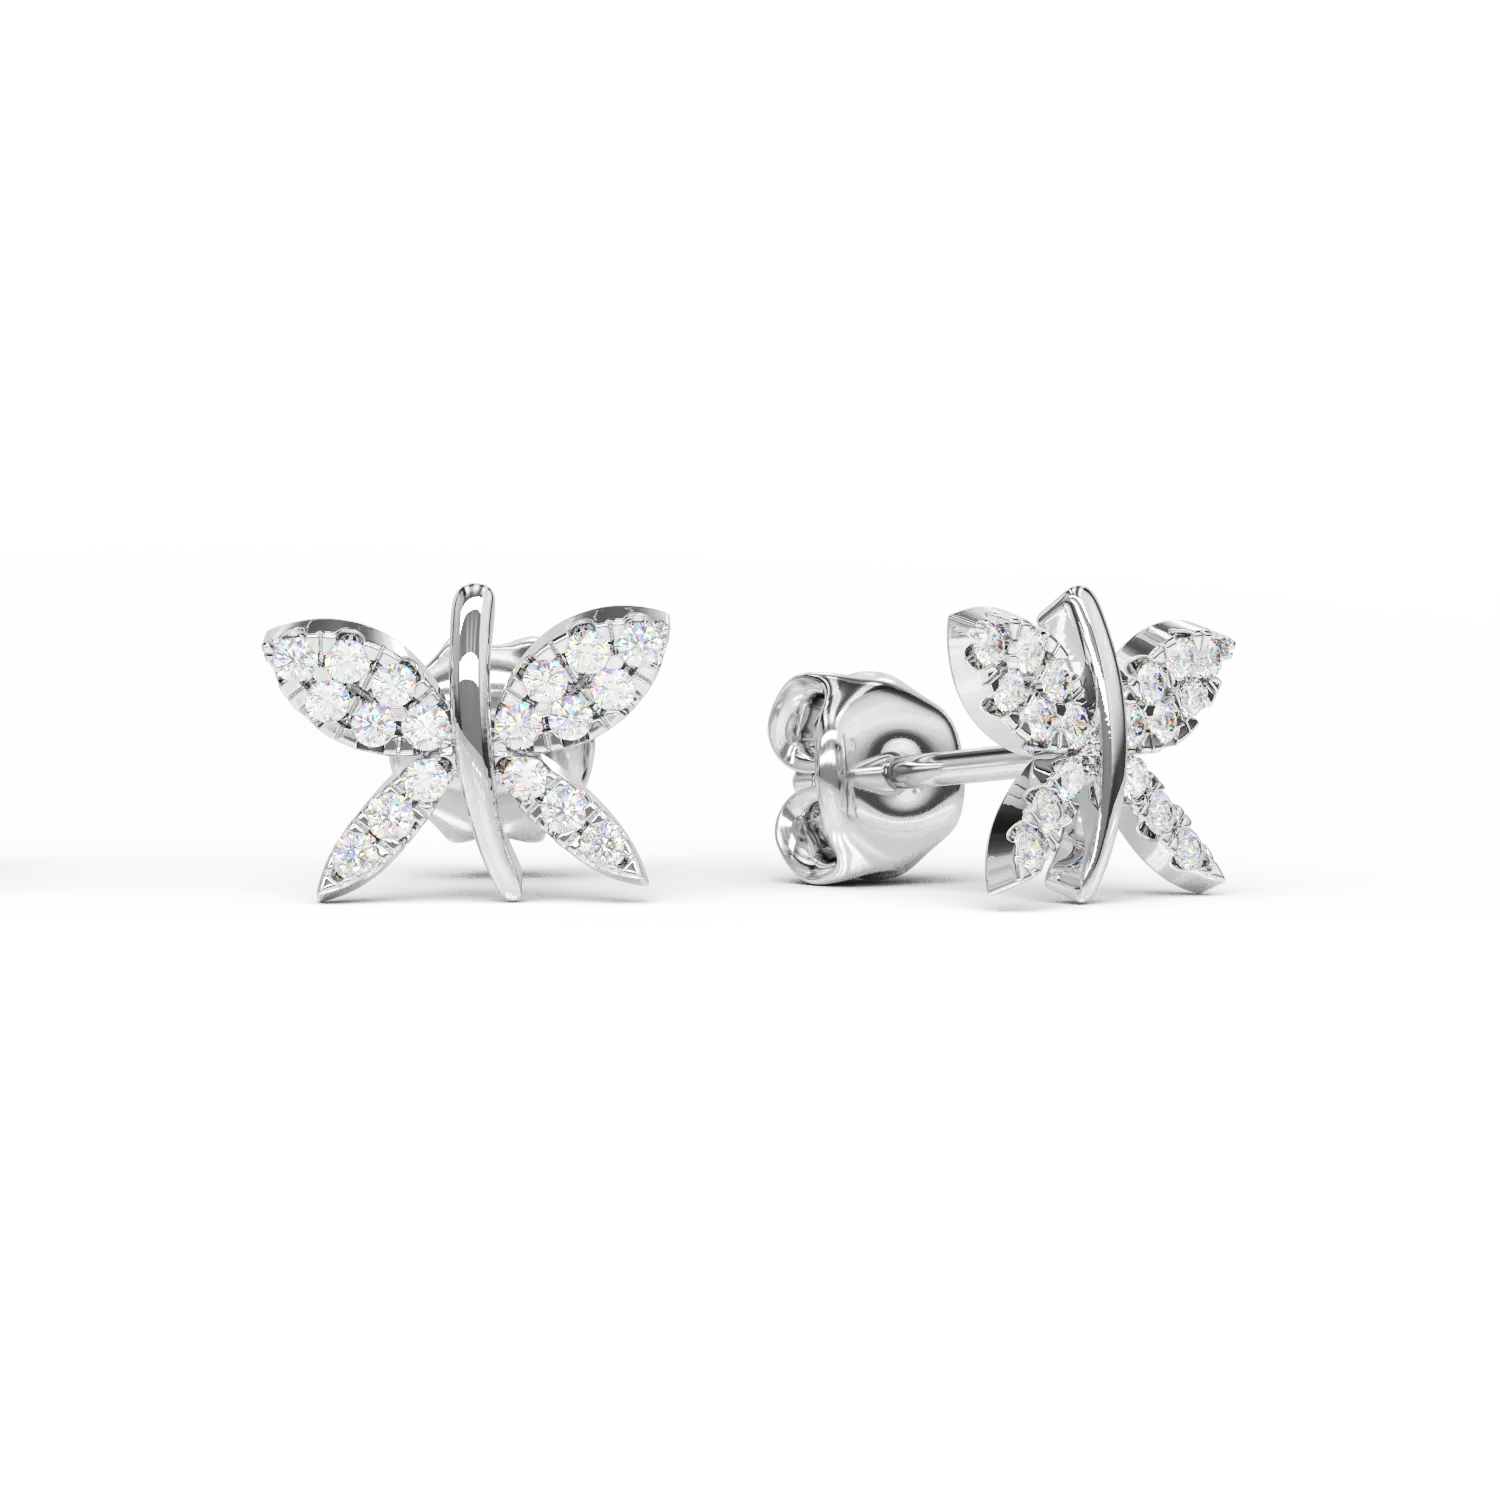 14K white gold dragonfly earrings with diamonds of 0.24ct